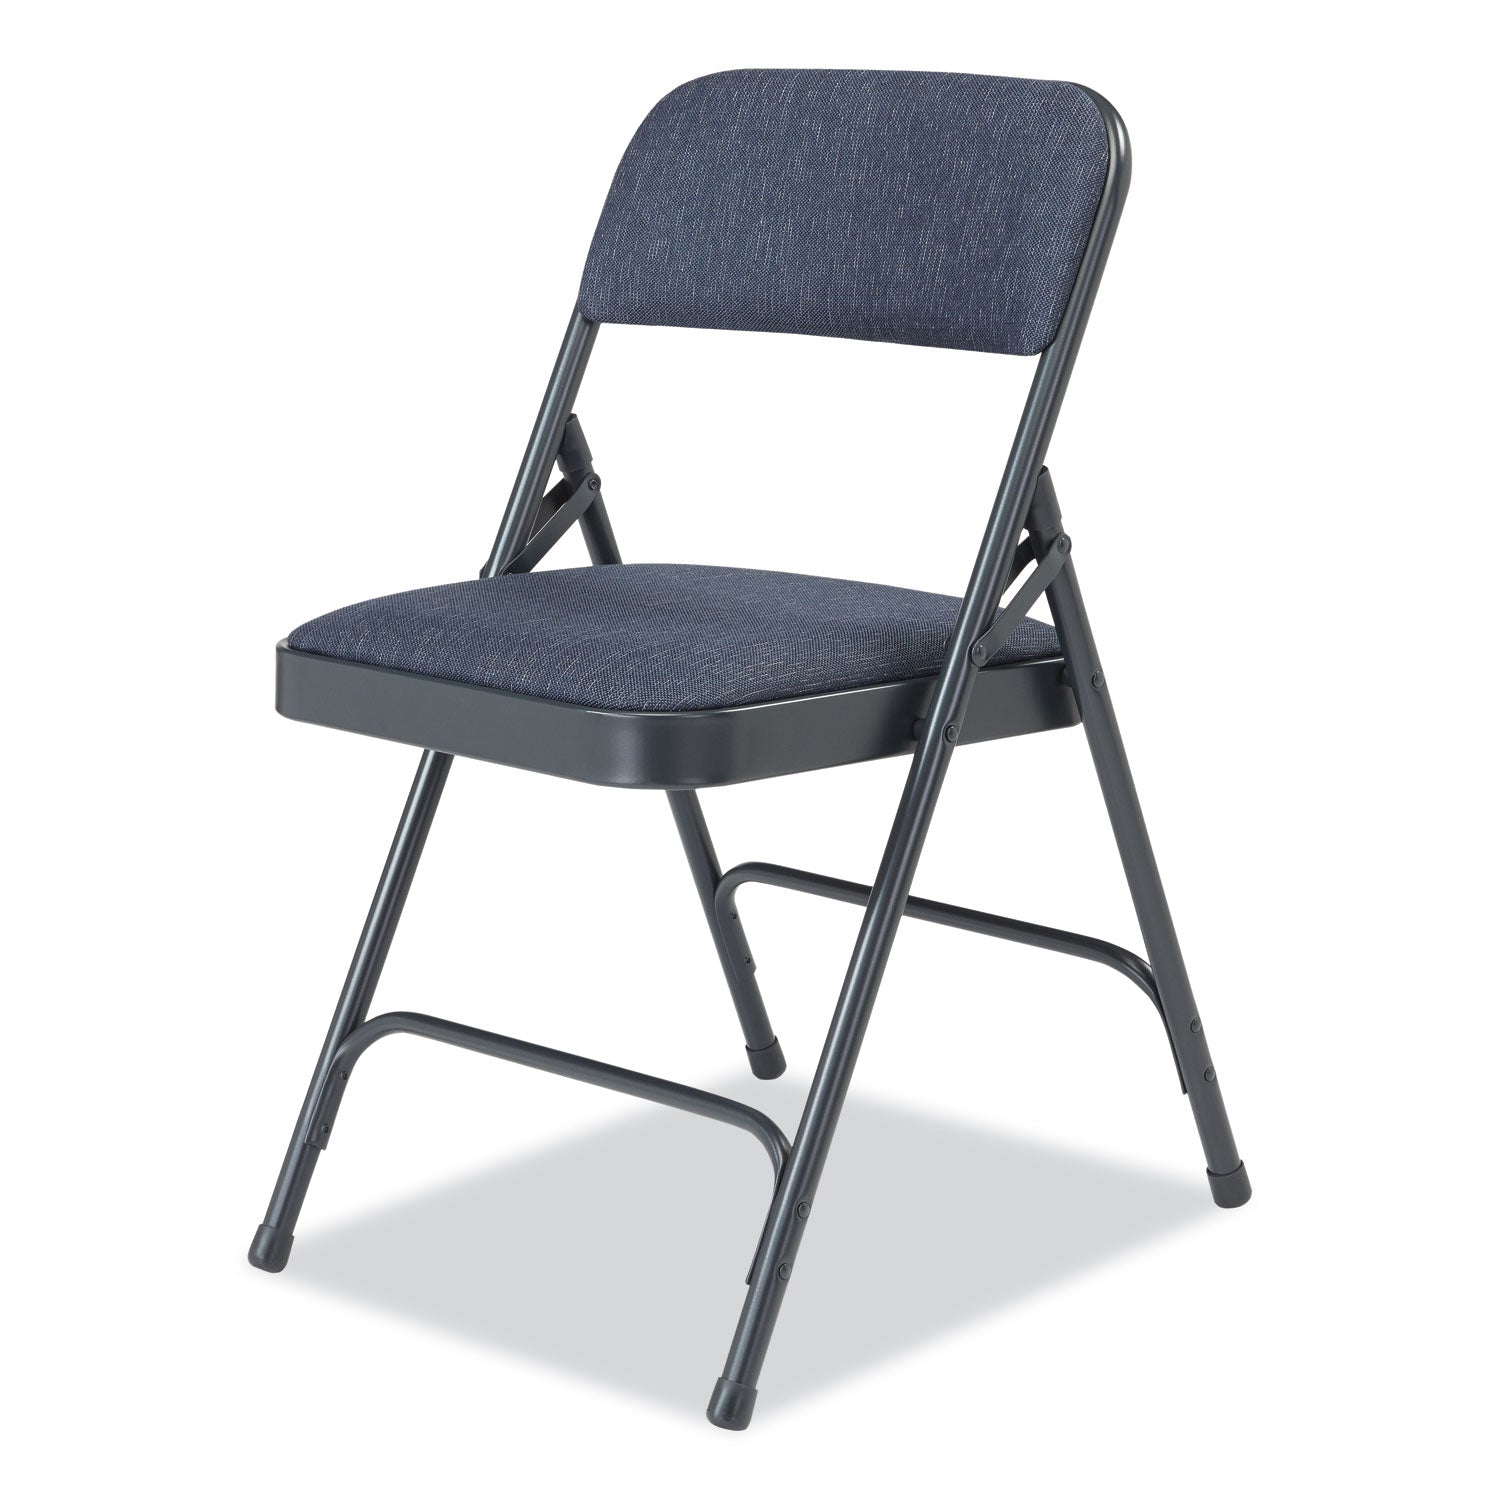 2200-series-fabric-dual-hinge-folding-chair-supports-500-lb-royal-blue-seat-back-char-blue-base4-ctships-in-1-3-bus-days_nps2204 - 3